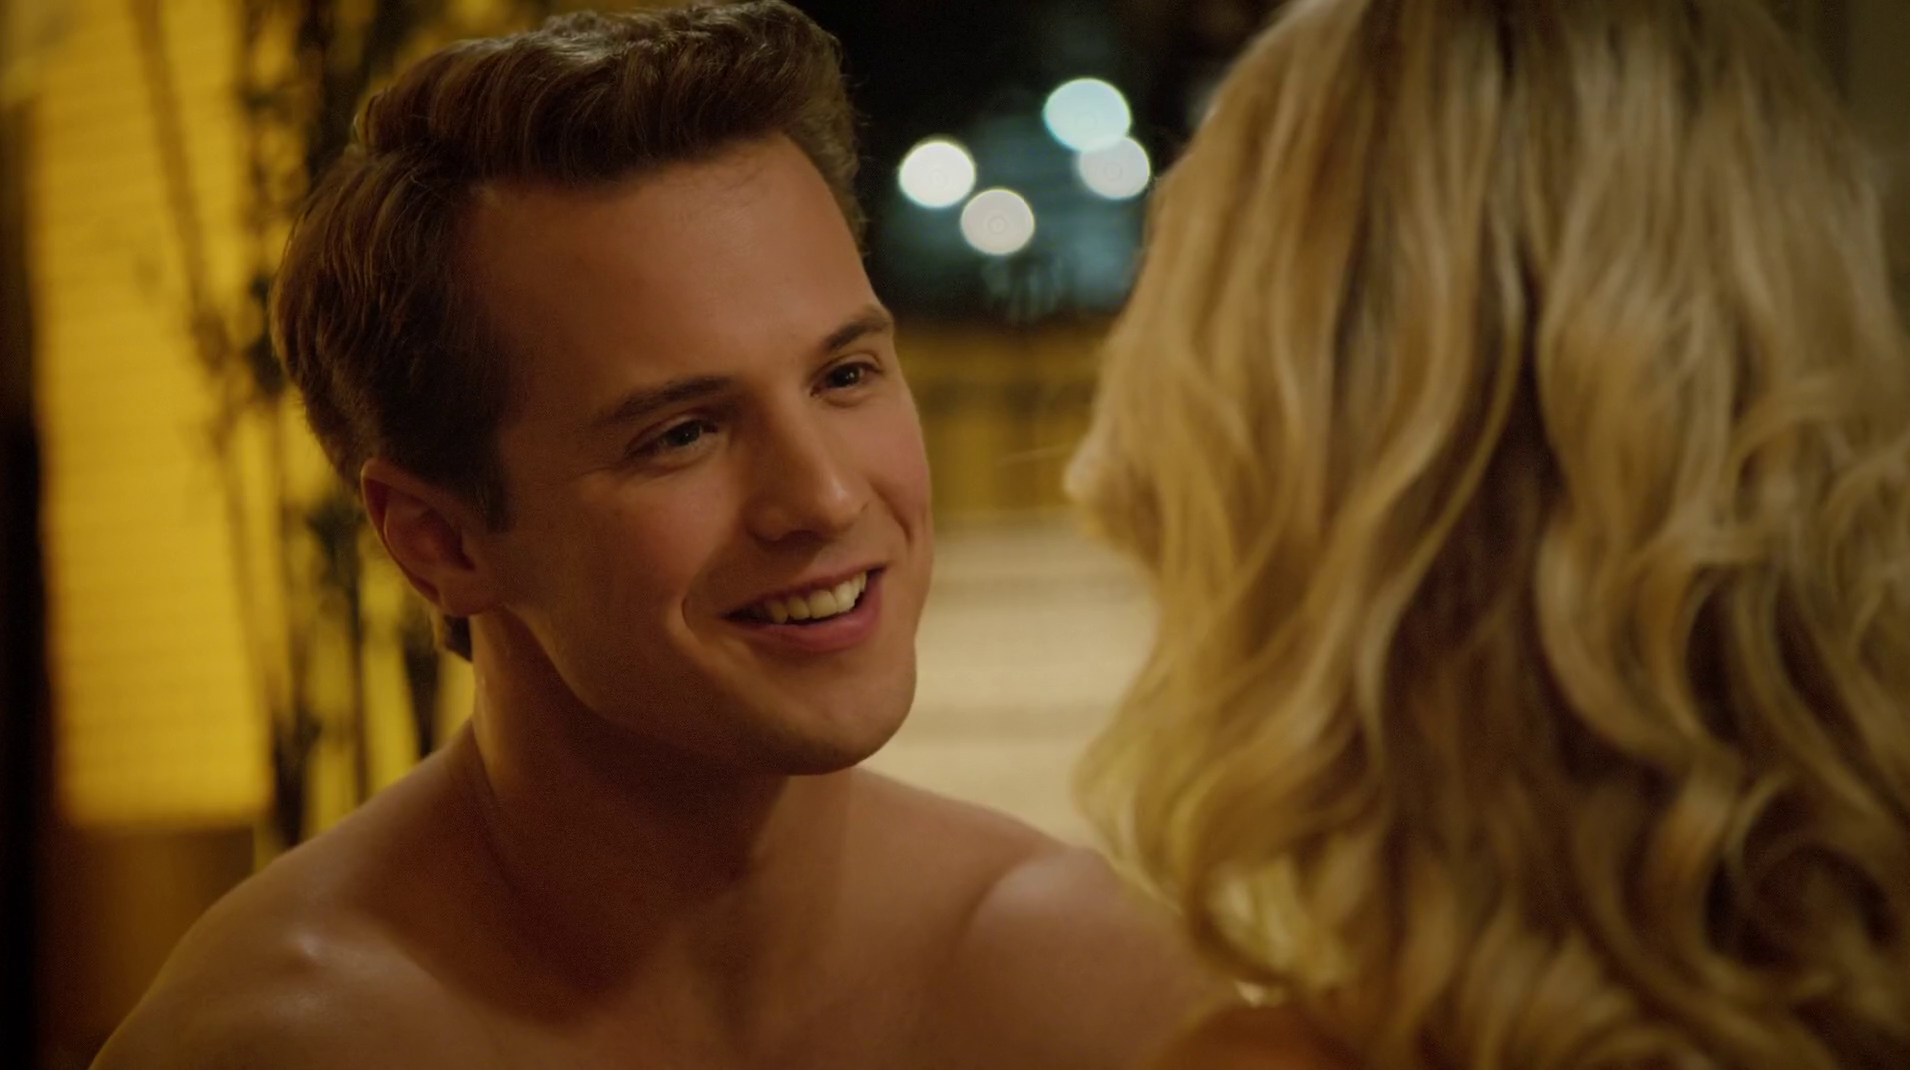 Naked freddie stroma Hottest, Well